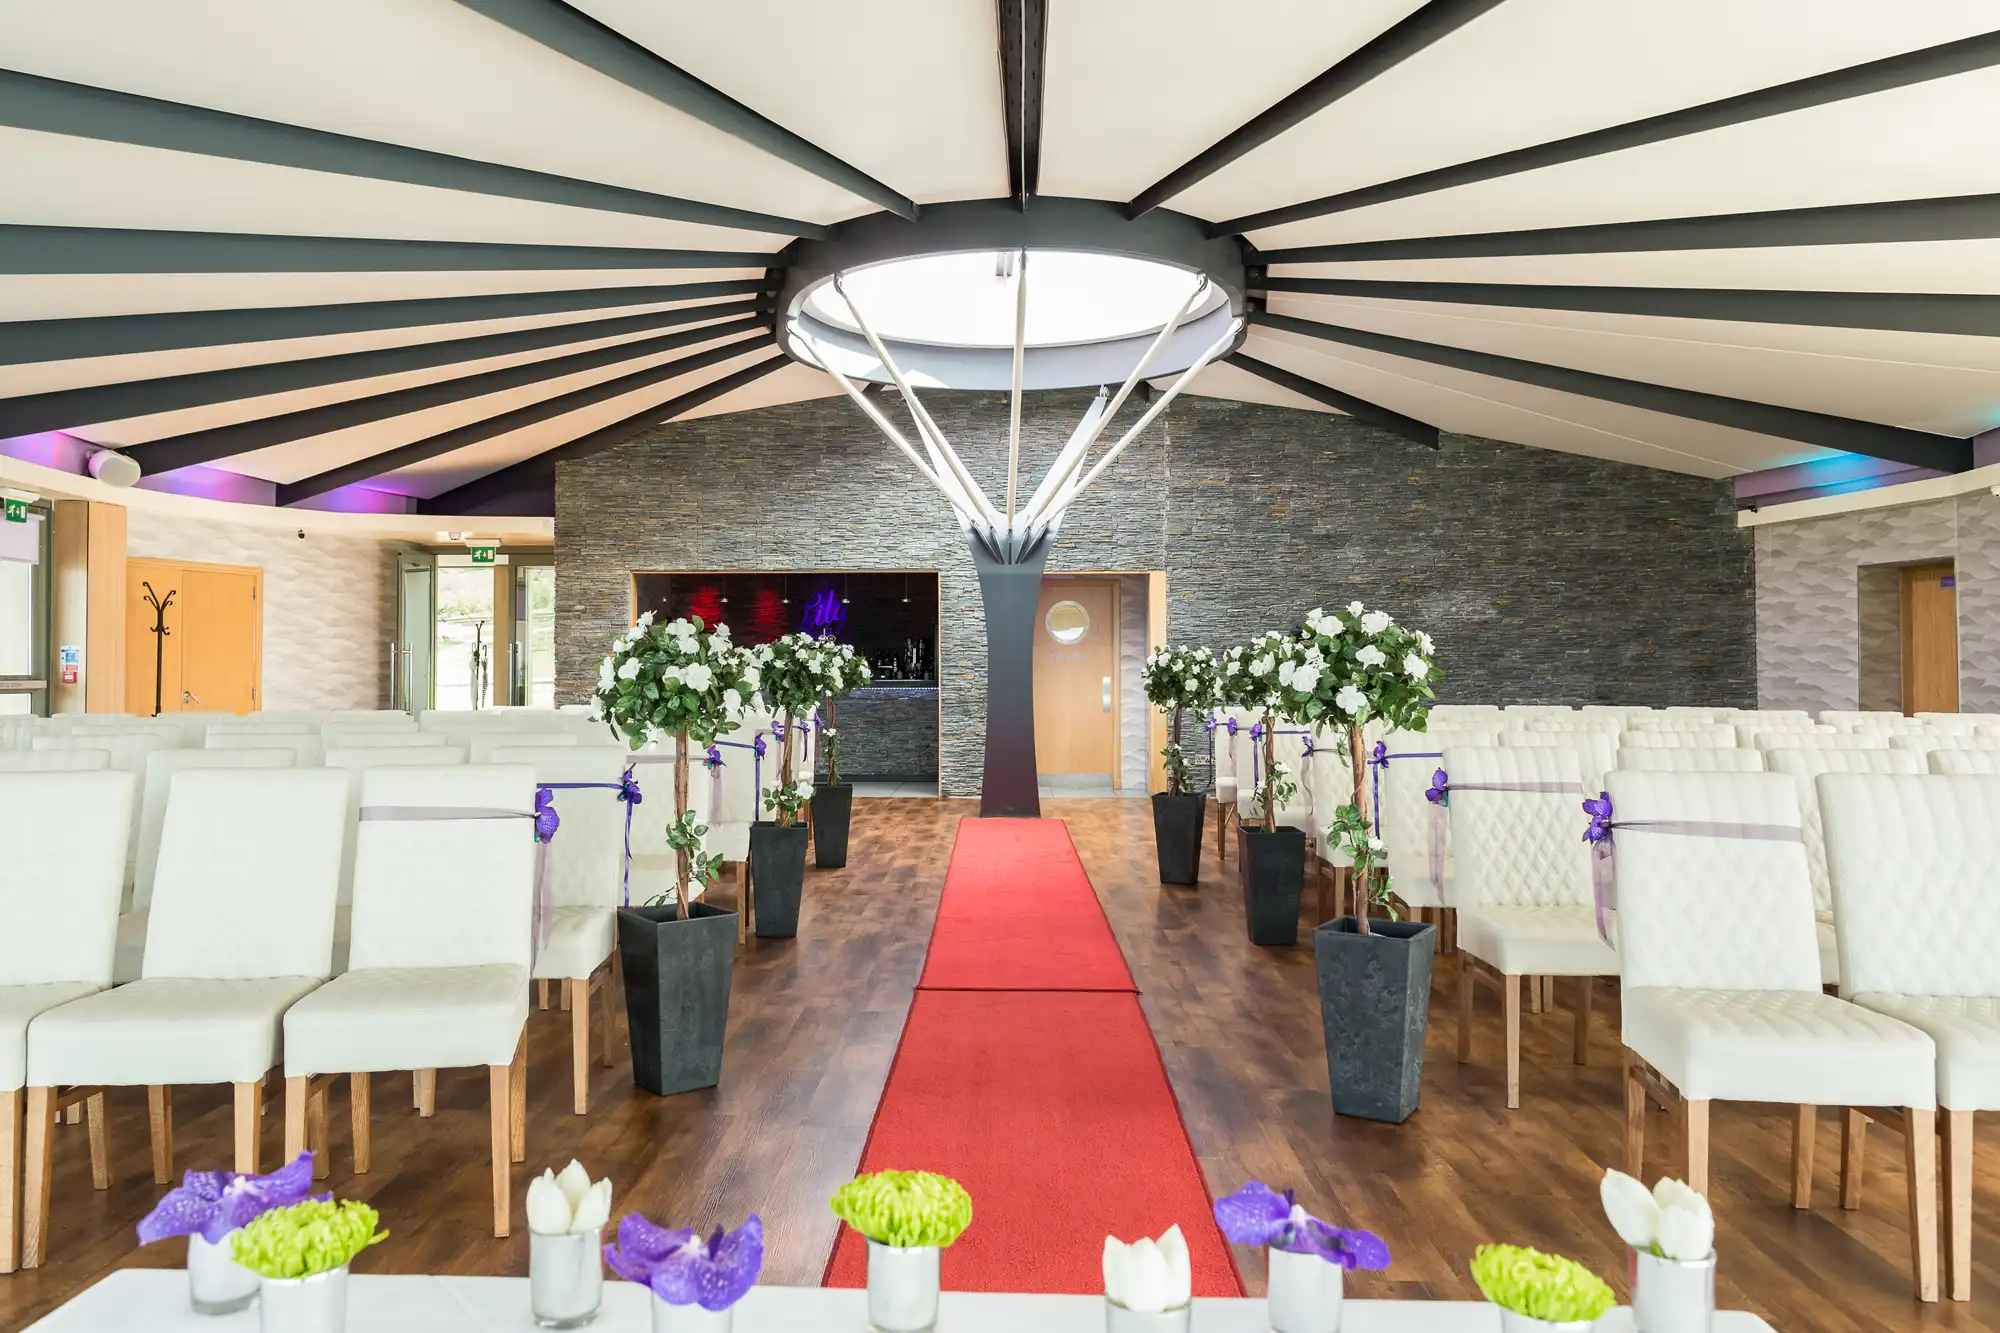 Interior of a wedding venue with white chairs, a red carpet aisle, and floral decorations under a modern ceiling with hanging chandelier.